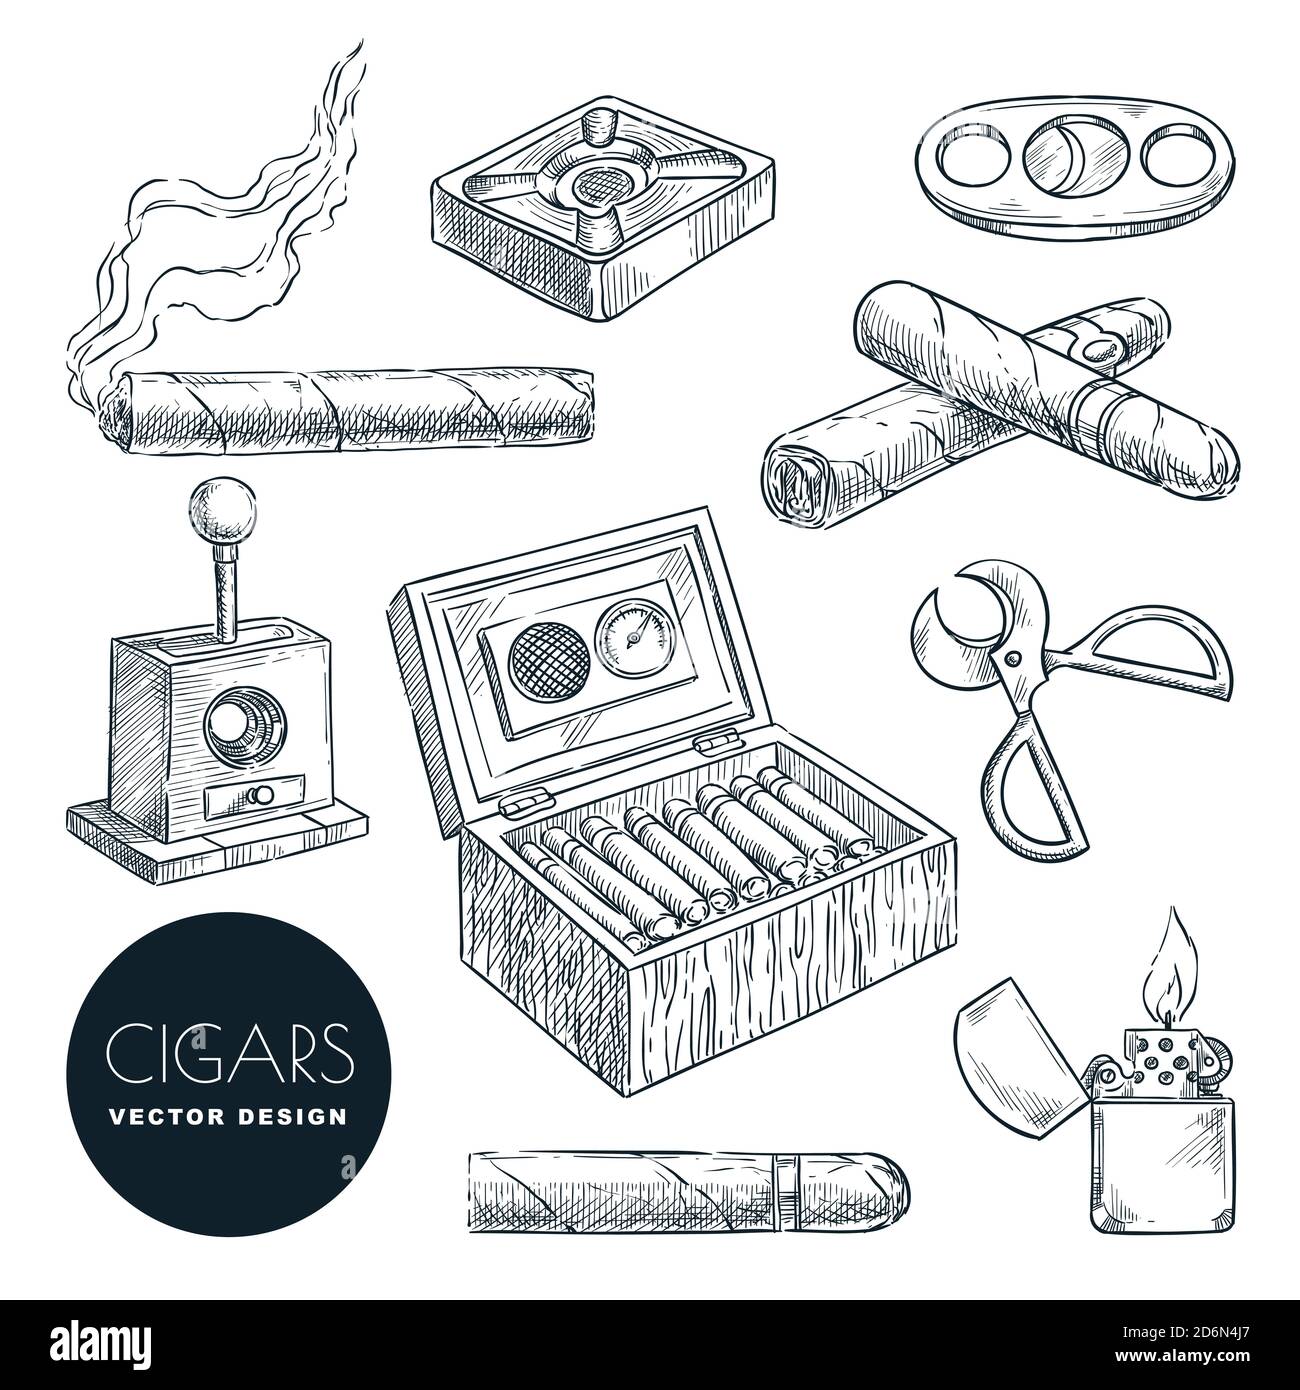 Cuban cigars and accessories vector vintage sketch illustration. Tobacco smoking hand drawn icons set, isolated on white background. Stock Vector